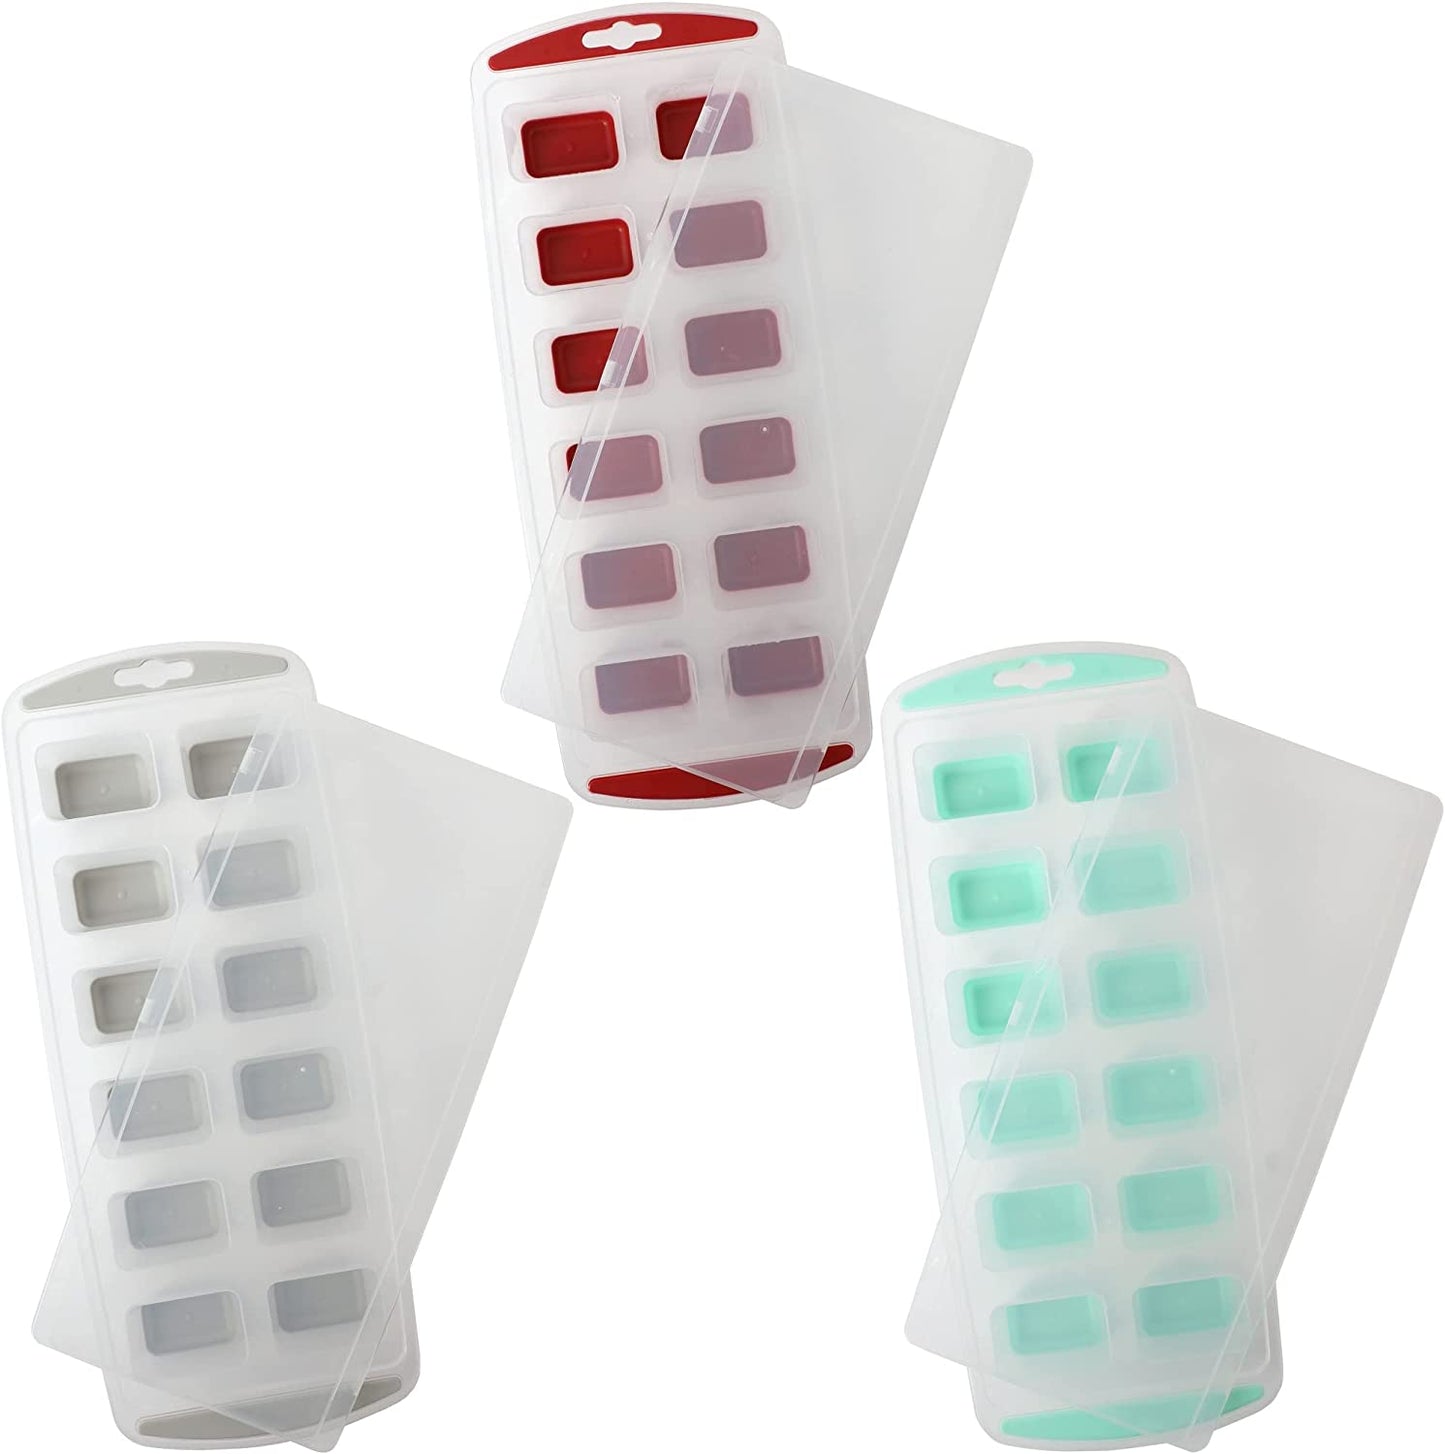 Silicone Narrow Ice Stick Cube Trays with Easy Push and Pop Out Material, Ideal for Sports and Water Bottles, Assorted Bright Colors. With Lids